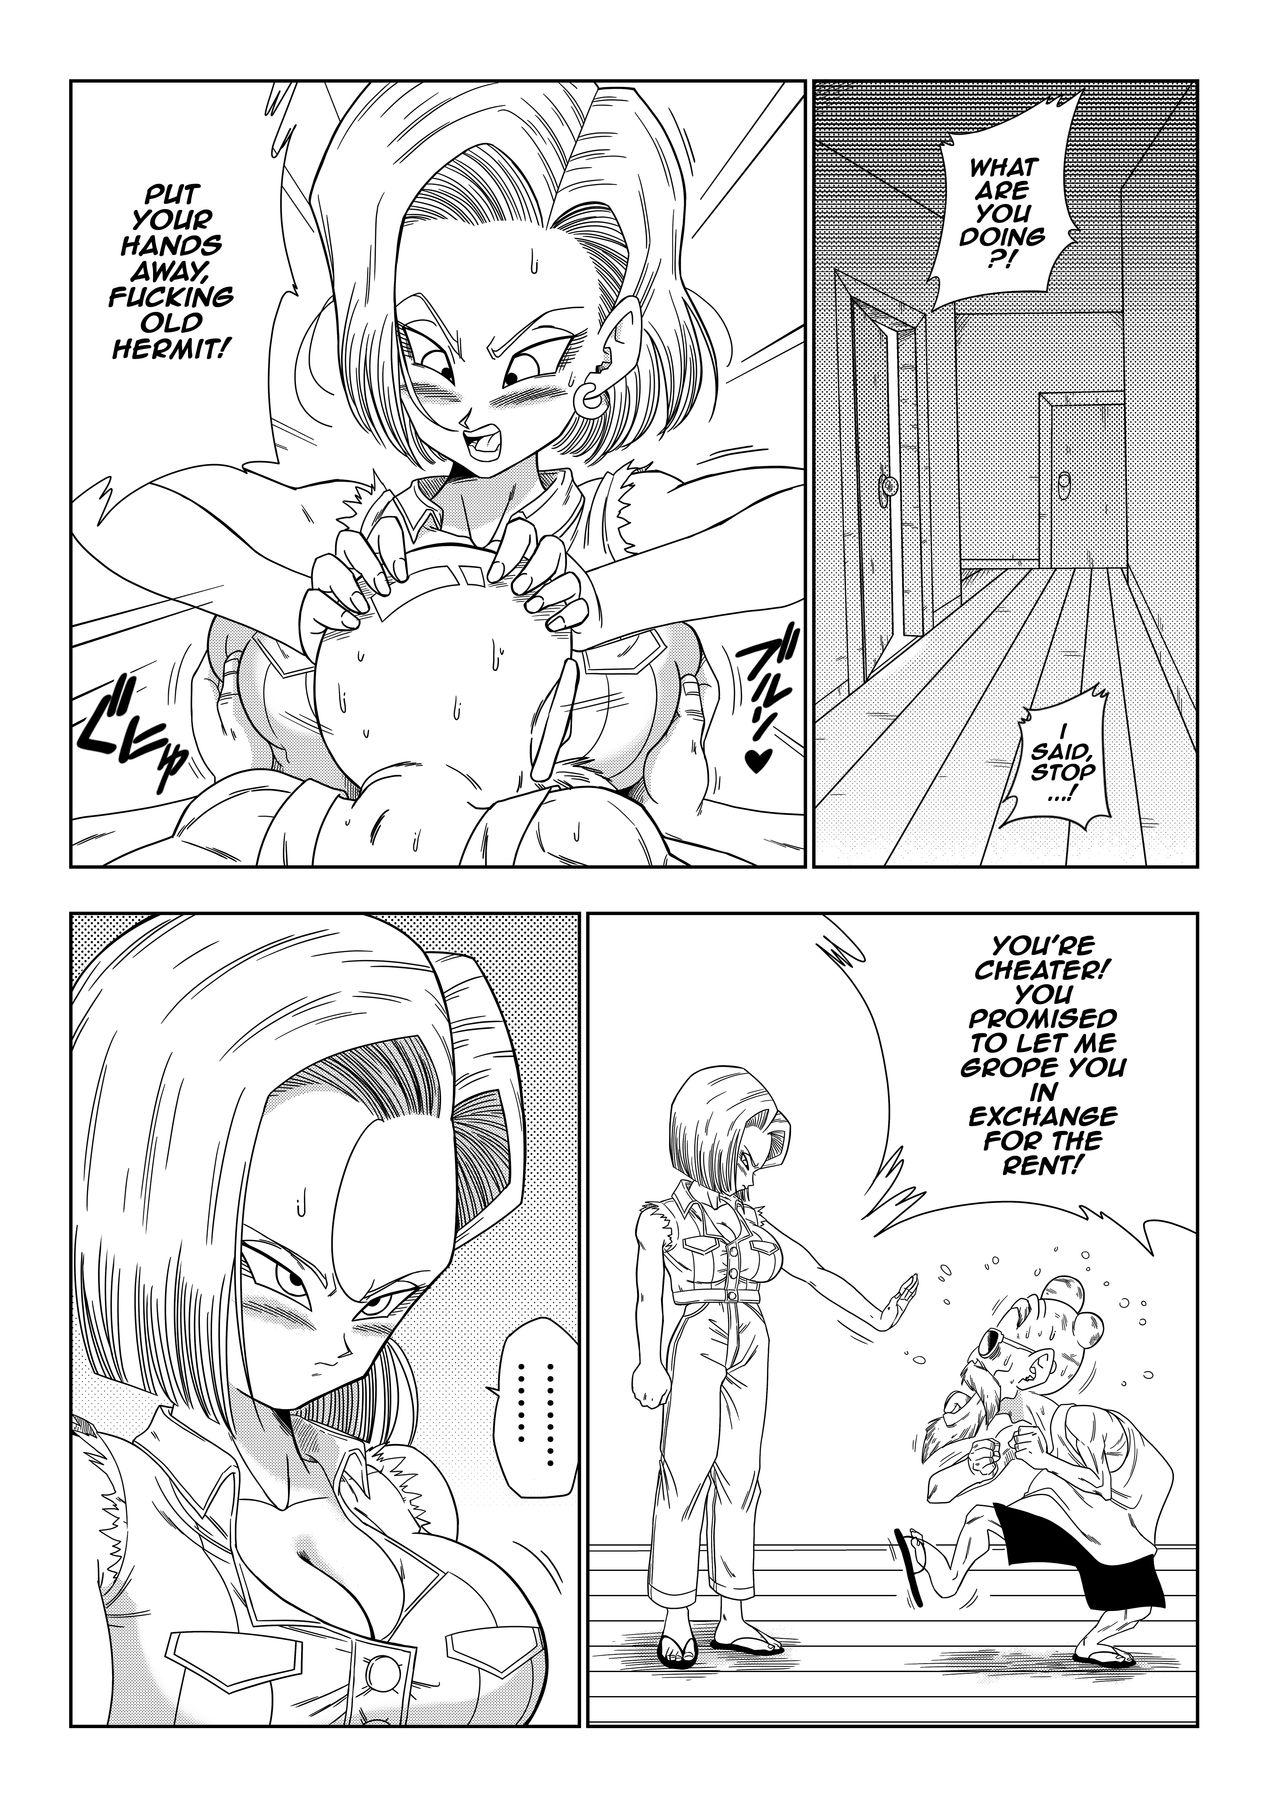 Mommy Android 18 vs Master Roshi - Dragon ball z Gay Rimming - Page 5